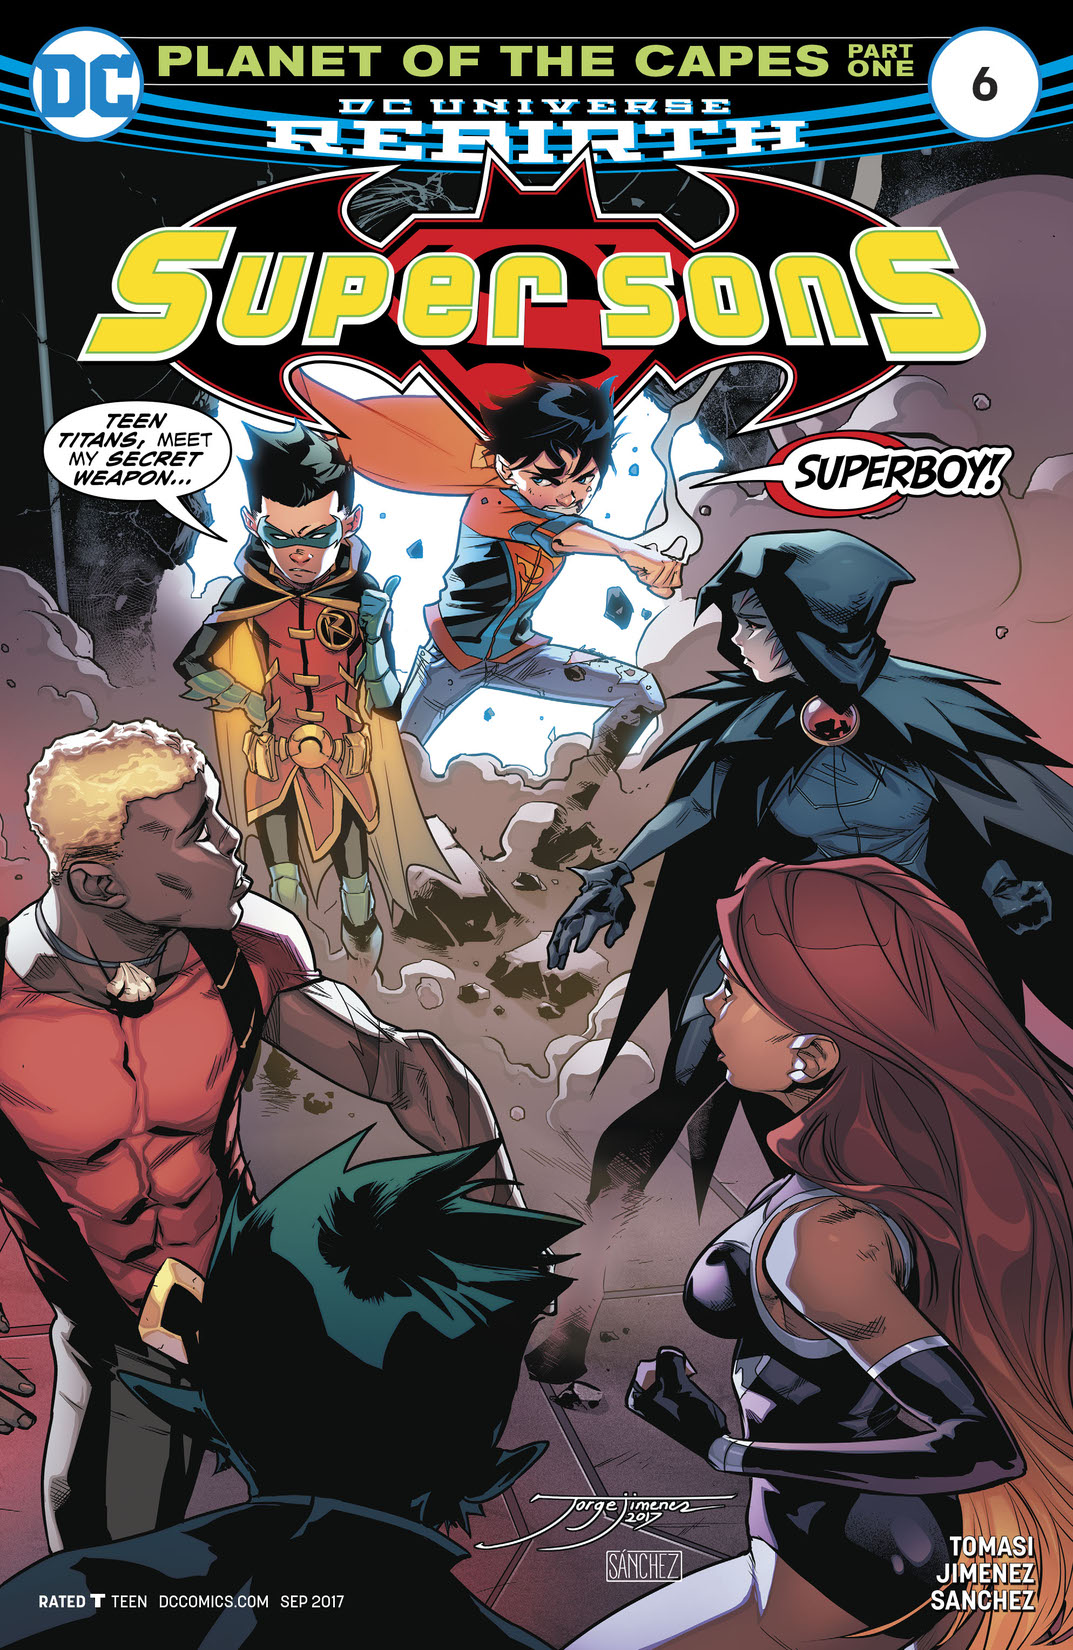 Super Sons (2017-) #6 preview images